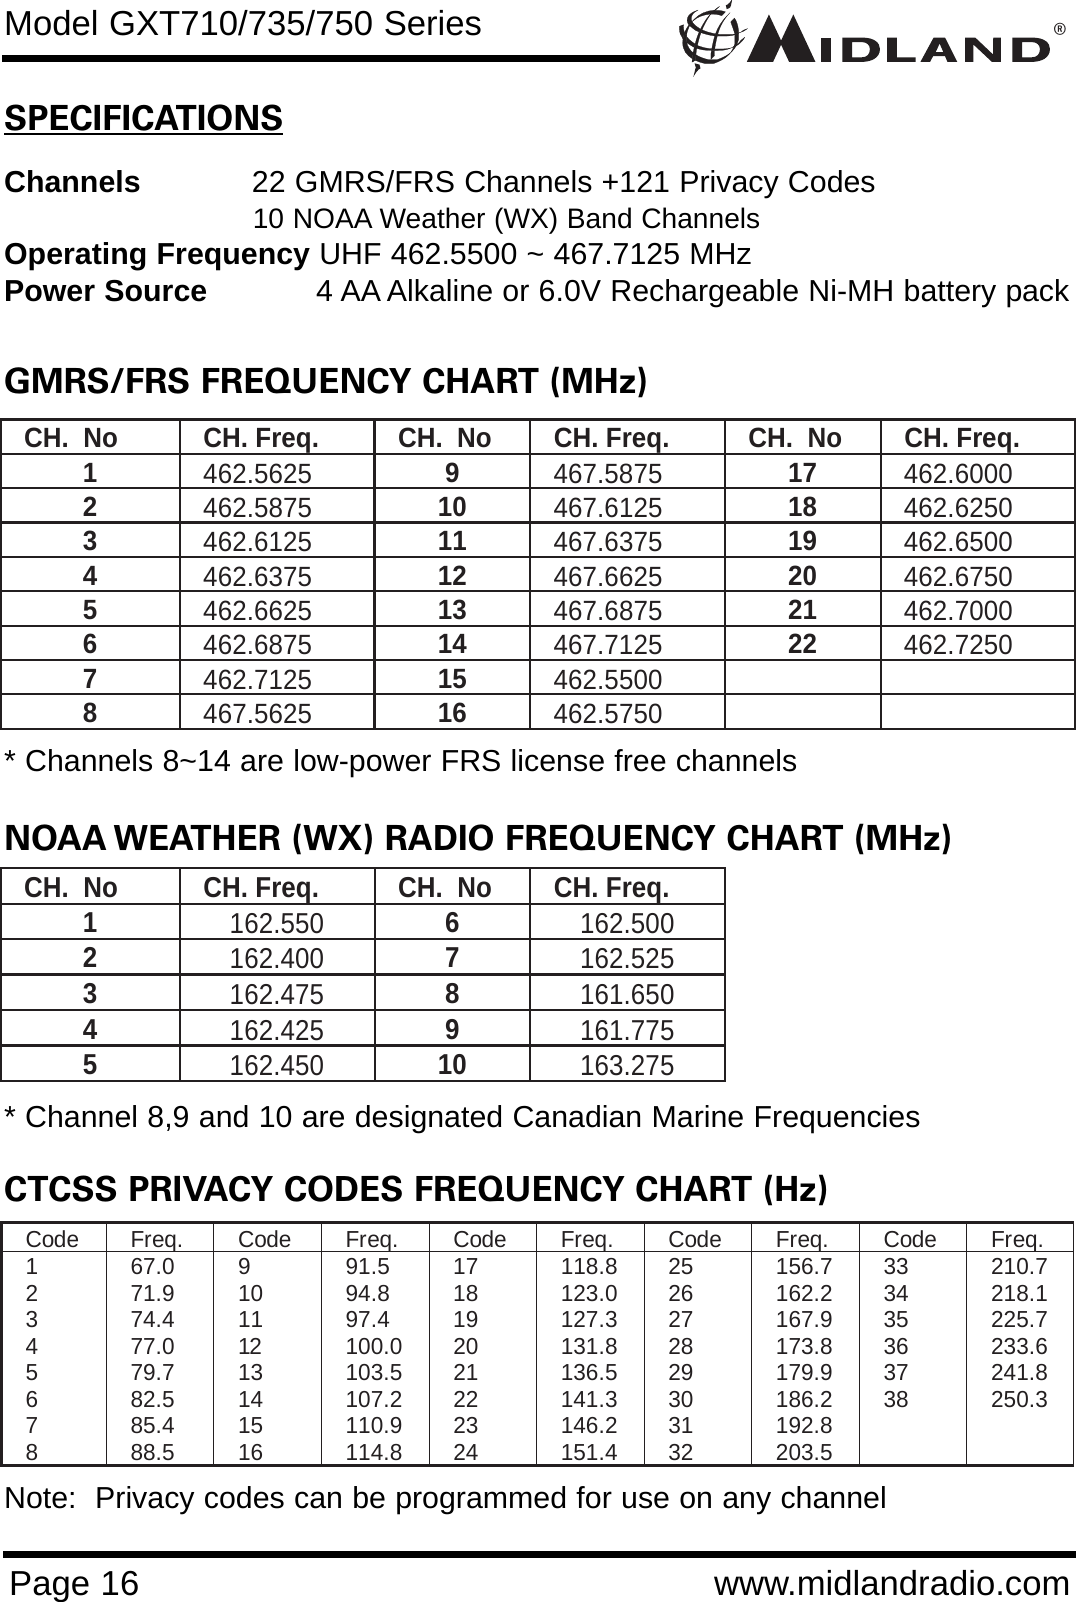 ®Page 16 www.midlandradio.comSPECIFICATIONSChannels 22 GMRS/FRS Channels +121 Privacy Codes10 NOAA Weather (WX) Band Channels Operating Frequency UHF 462.5500 ~ 467.7125 MHzPower Source 4 AA Alkaline or 6.0V Rechargeable Ni-MH battery packGMRS/FRS FREQUENCY CHART (MHz)CH.  No  CH. Freq.  CH.  No  CH. Freq.  CH.  No  CH. Freq. 1  462.5625 9  467.5875 17  462.6000 2  462.5875 10  467.6125 18  462.6250 3  462.6125 11  467.6375 19  462.6500 4  462.6375 12  467.6625 20  462.6750 5  462.6625 13  467.6875 21  462.7000 6  462.6875 14  467.7125 22  462.7250 7  462.7125 15  462.5500   8  467.5625 16  462.5750   NOAA WEATHER (WX) RADIO FREQUENCY CHART (MHz)CH.  No  CH. Freq.  CH.  No  CH. Freq. 1  162.550 6  162.500 2  162.400 7  162.525 3  162.475 8  161.650 4  162.425 9  161.775 5  162.450 10  163.275 CTCSS PRIVACY CODES FREQUENCY CHART (Hz)Code Freq.  Code Freq.  Code Freq.  Code Freq.  Code Freq.  1  67.0 9  91.5 17  118.8 25  156.7 33  210.7 2  71.9 10  94.8 18  123.0 26  162.2 34  218.1 3  74.4 11  97.4 19  127.3 27  167.9 35  225.7 4 77.0 12 100.0 20  131.8 28  173.8 36  233.6 5 79.7 13 103.5 21  136.5 29  179.9 37  241.8 6 82.5 14 107.2 22  141.3 30  186.2 38  250.3 7 85.4 15 110.9 23  146.2 31  192.8    8 88.5 16 114.8 24  151.4 32  203.5    * Channel 8,9 and 10 are designated Canadian Marine Frequencies* Channels 8~14 are low-power FRS license free channelsNote:  Privacy codes can be programmed for use on any channelModel GXT710/735/750 Series